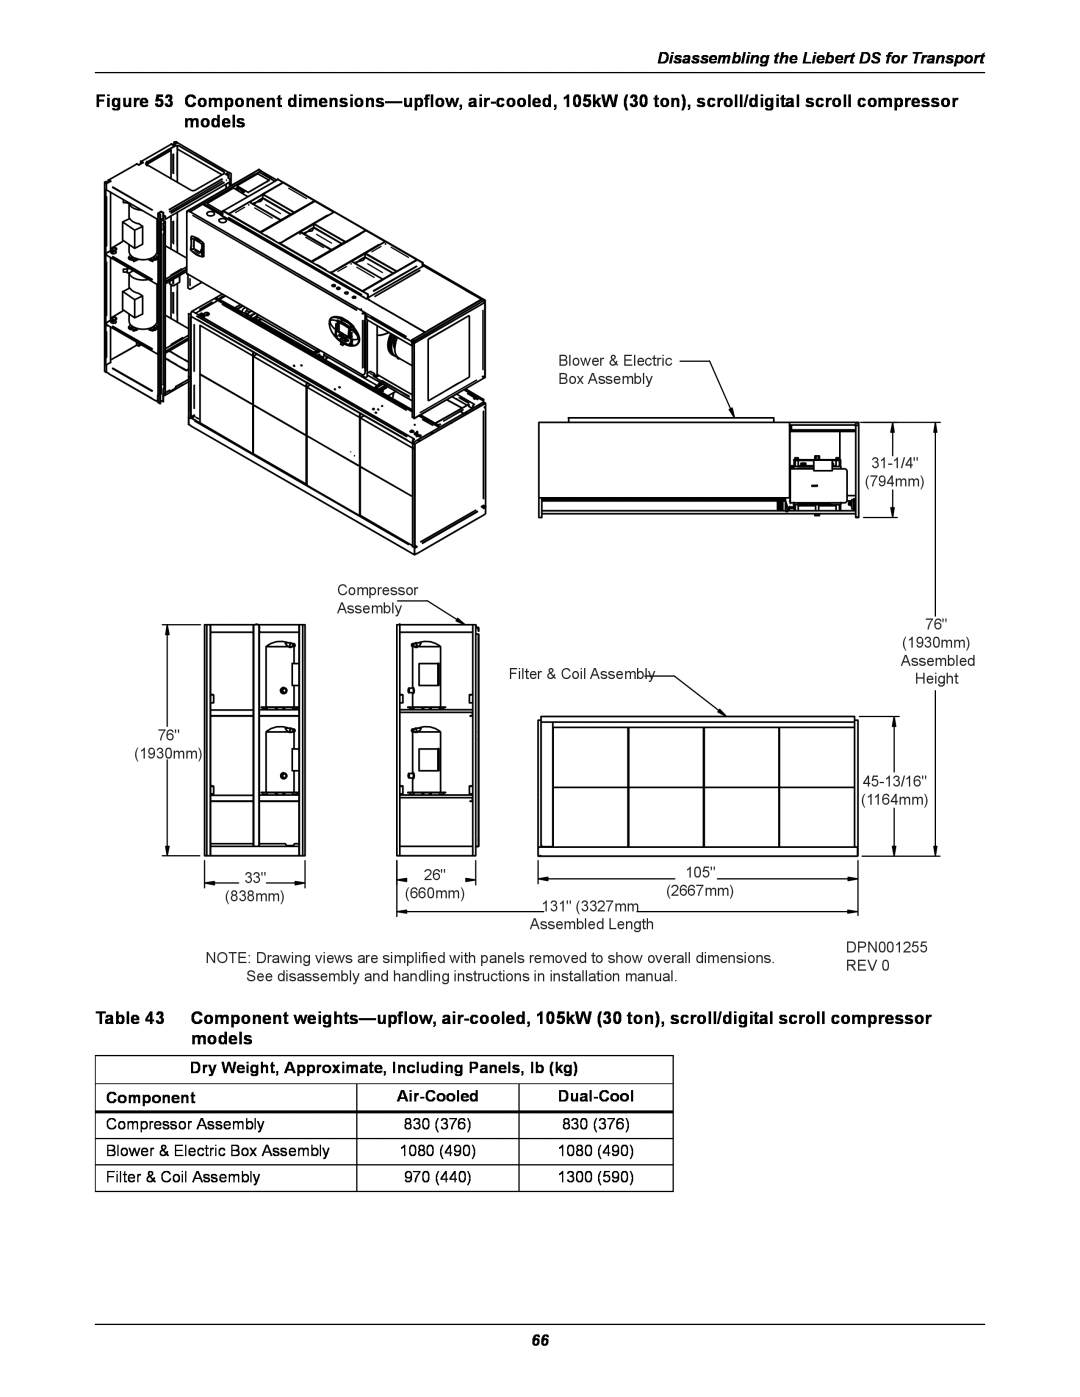 Liebert DS user manual Component dimensions-upflow, air-cooled, 105kW 30 ton, scroll/digital scroll compressor models 